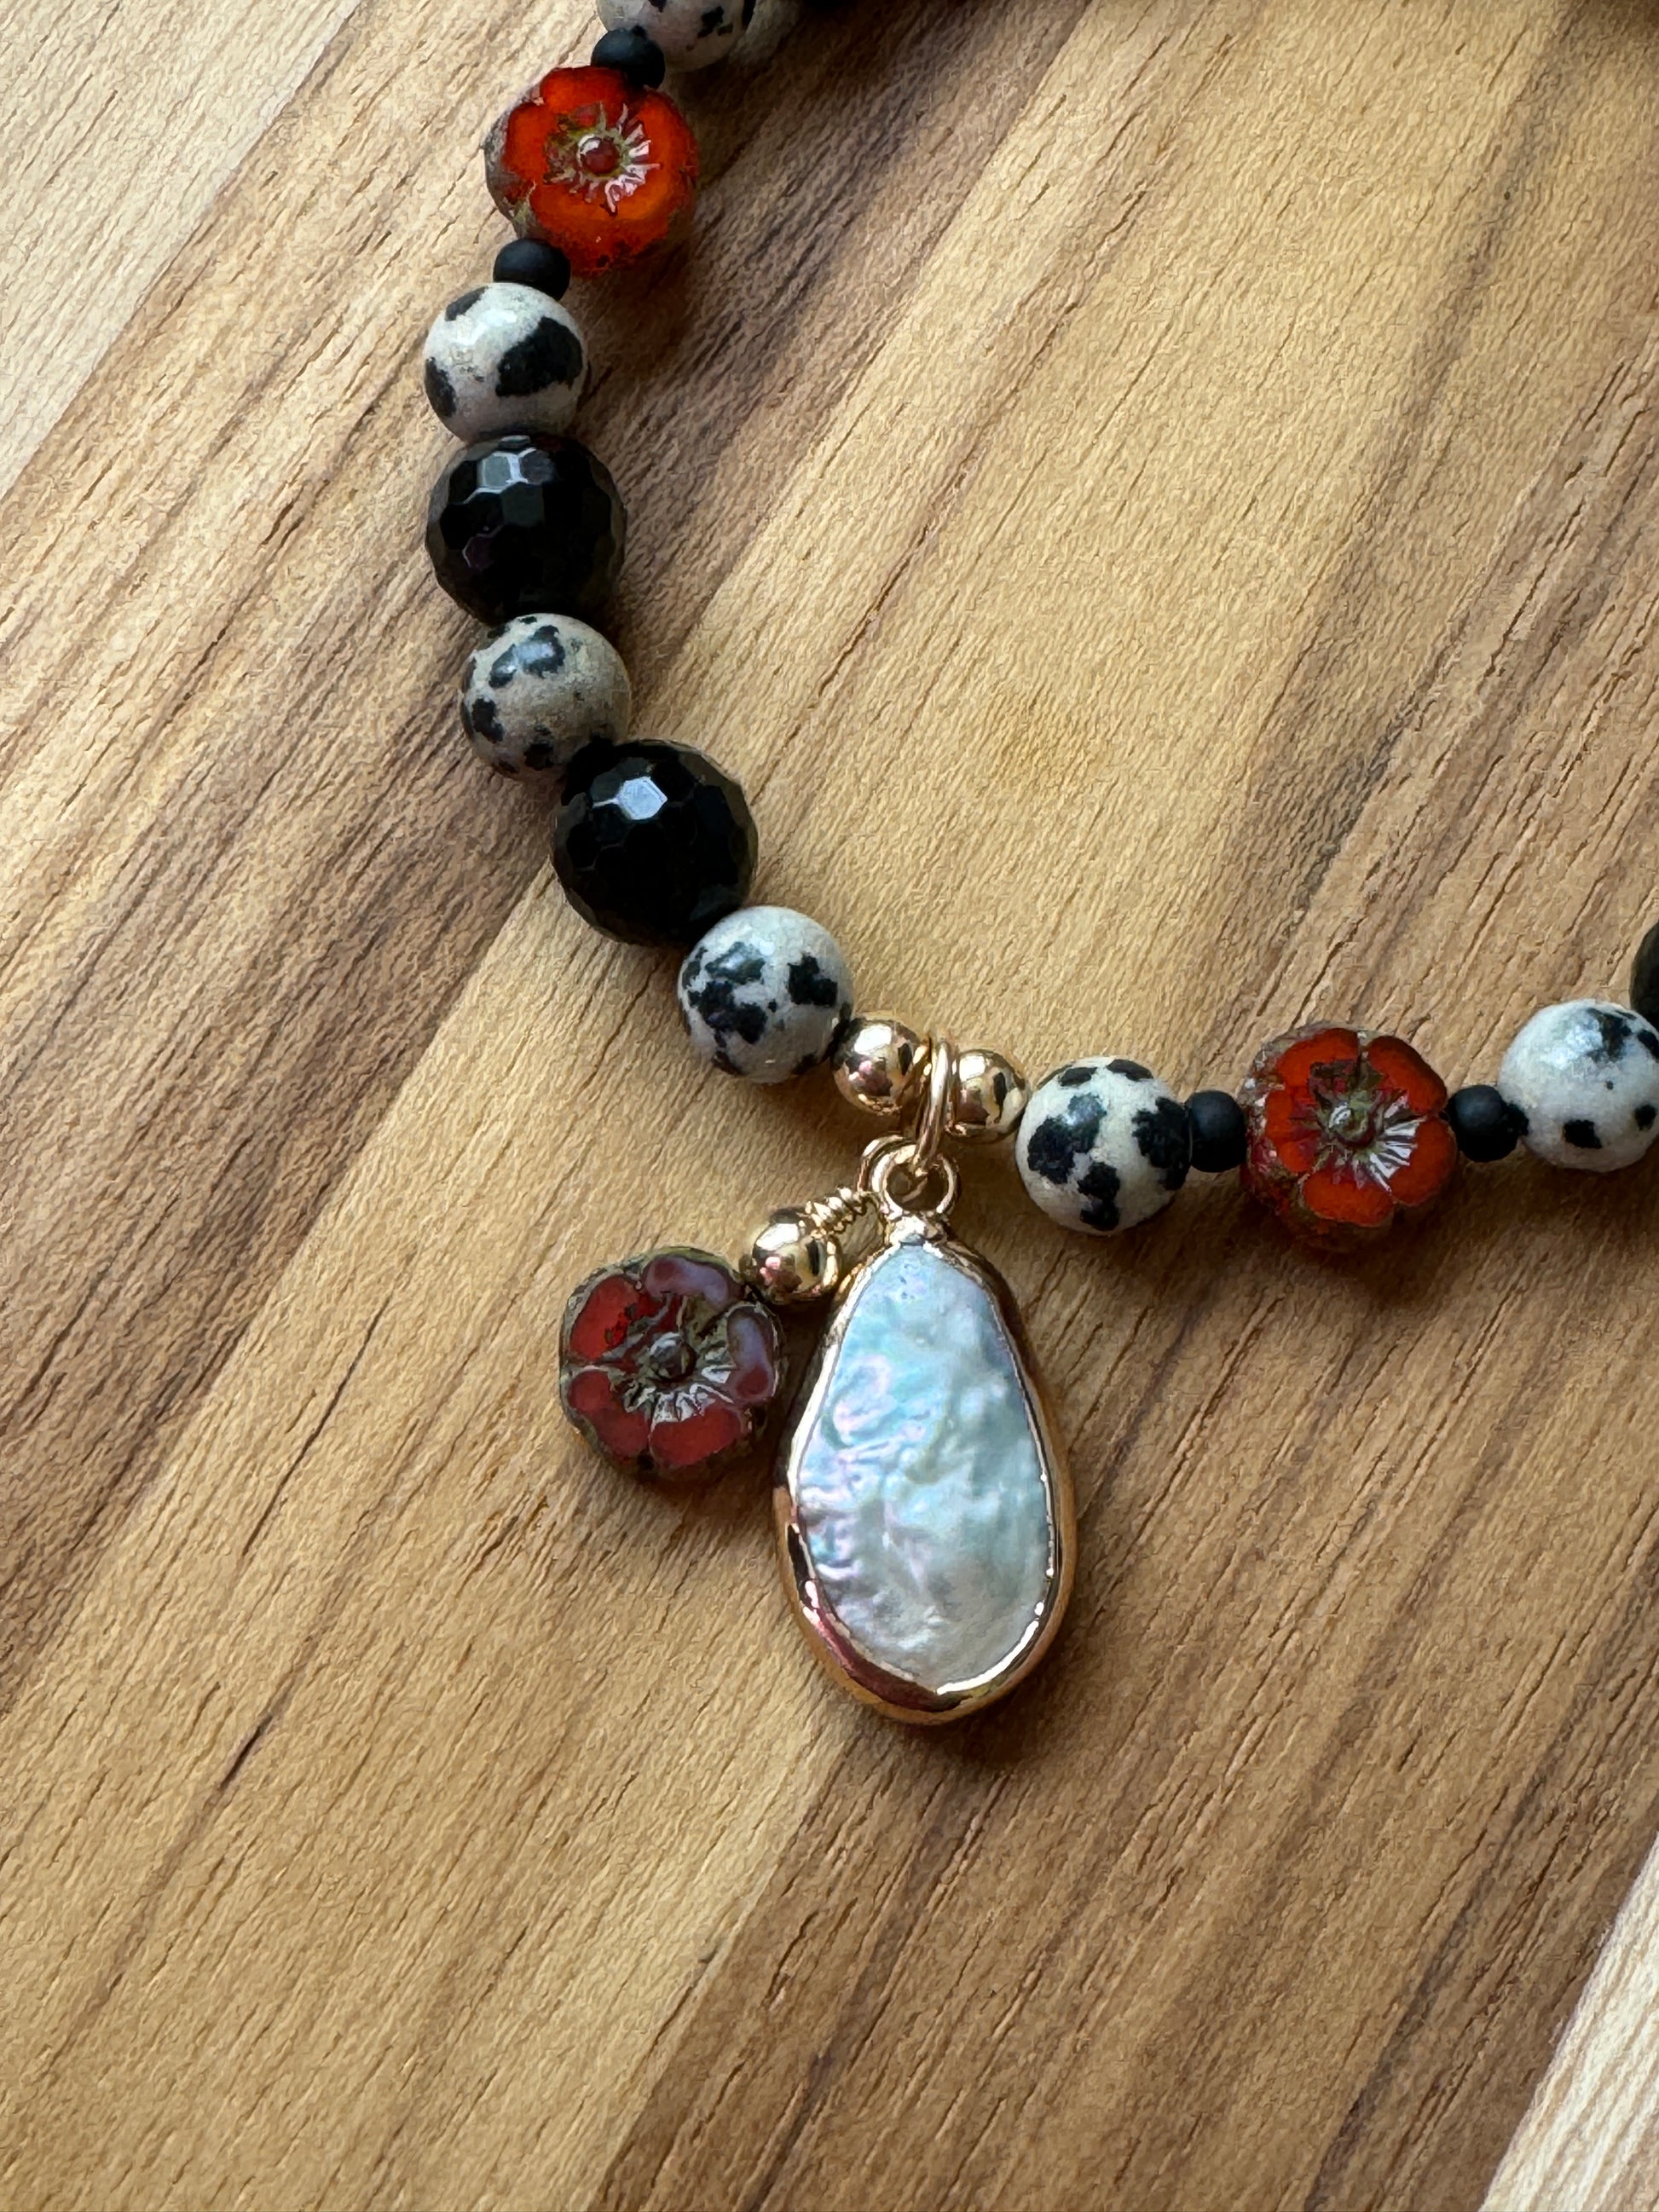 Dalmatian Jasper and Black Onyx Stretch Beaded Bracelet with Baroque Pearl and Red Flower Dangles - My Urban Gems